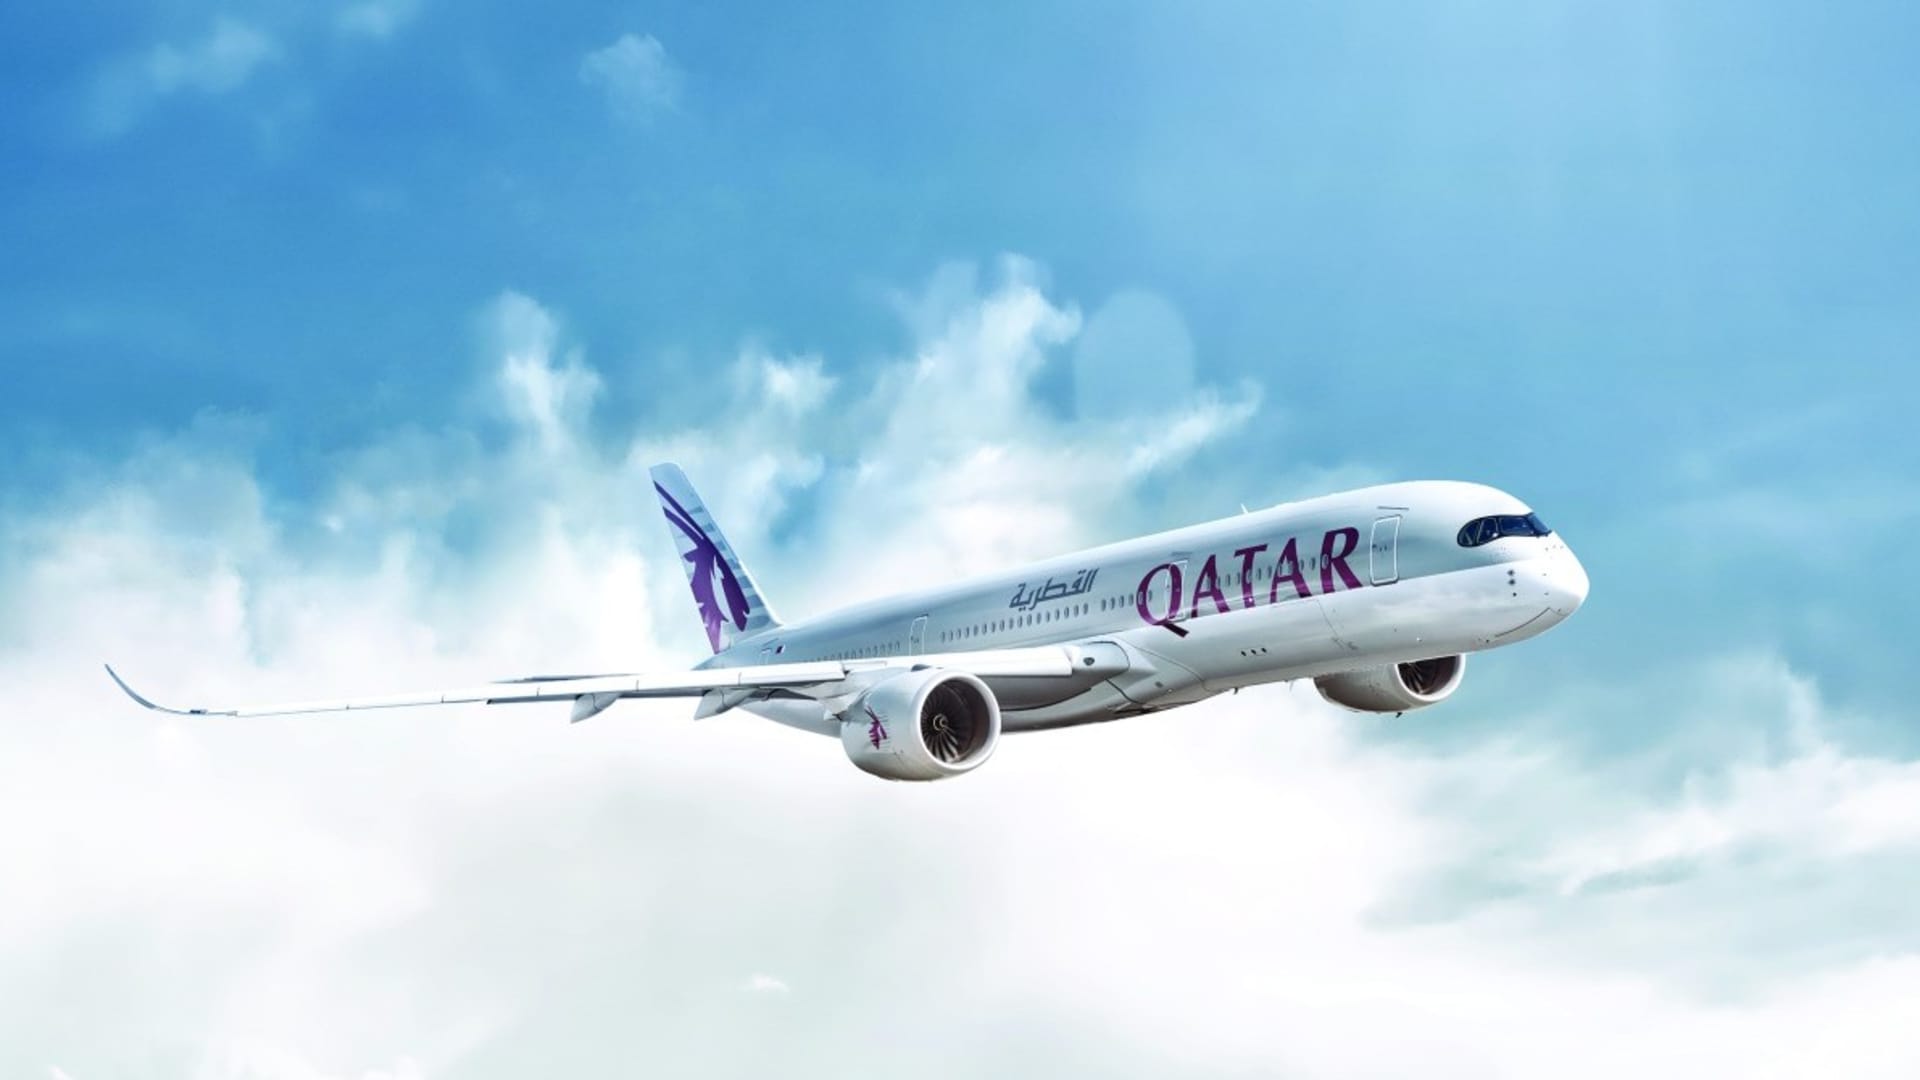 Doha-based Qatar Airways was launched in the mid-1990s and currently flies to more than 140 destinations.